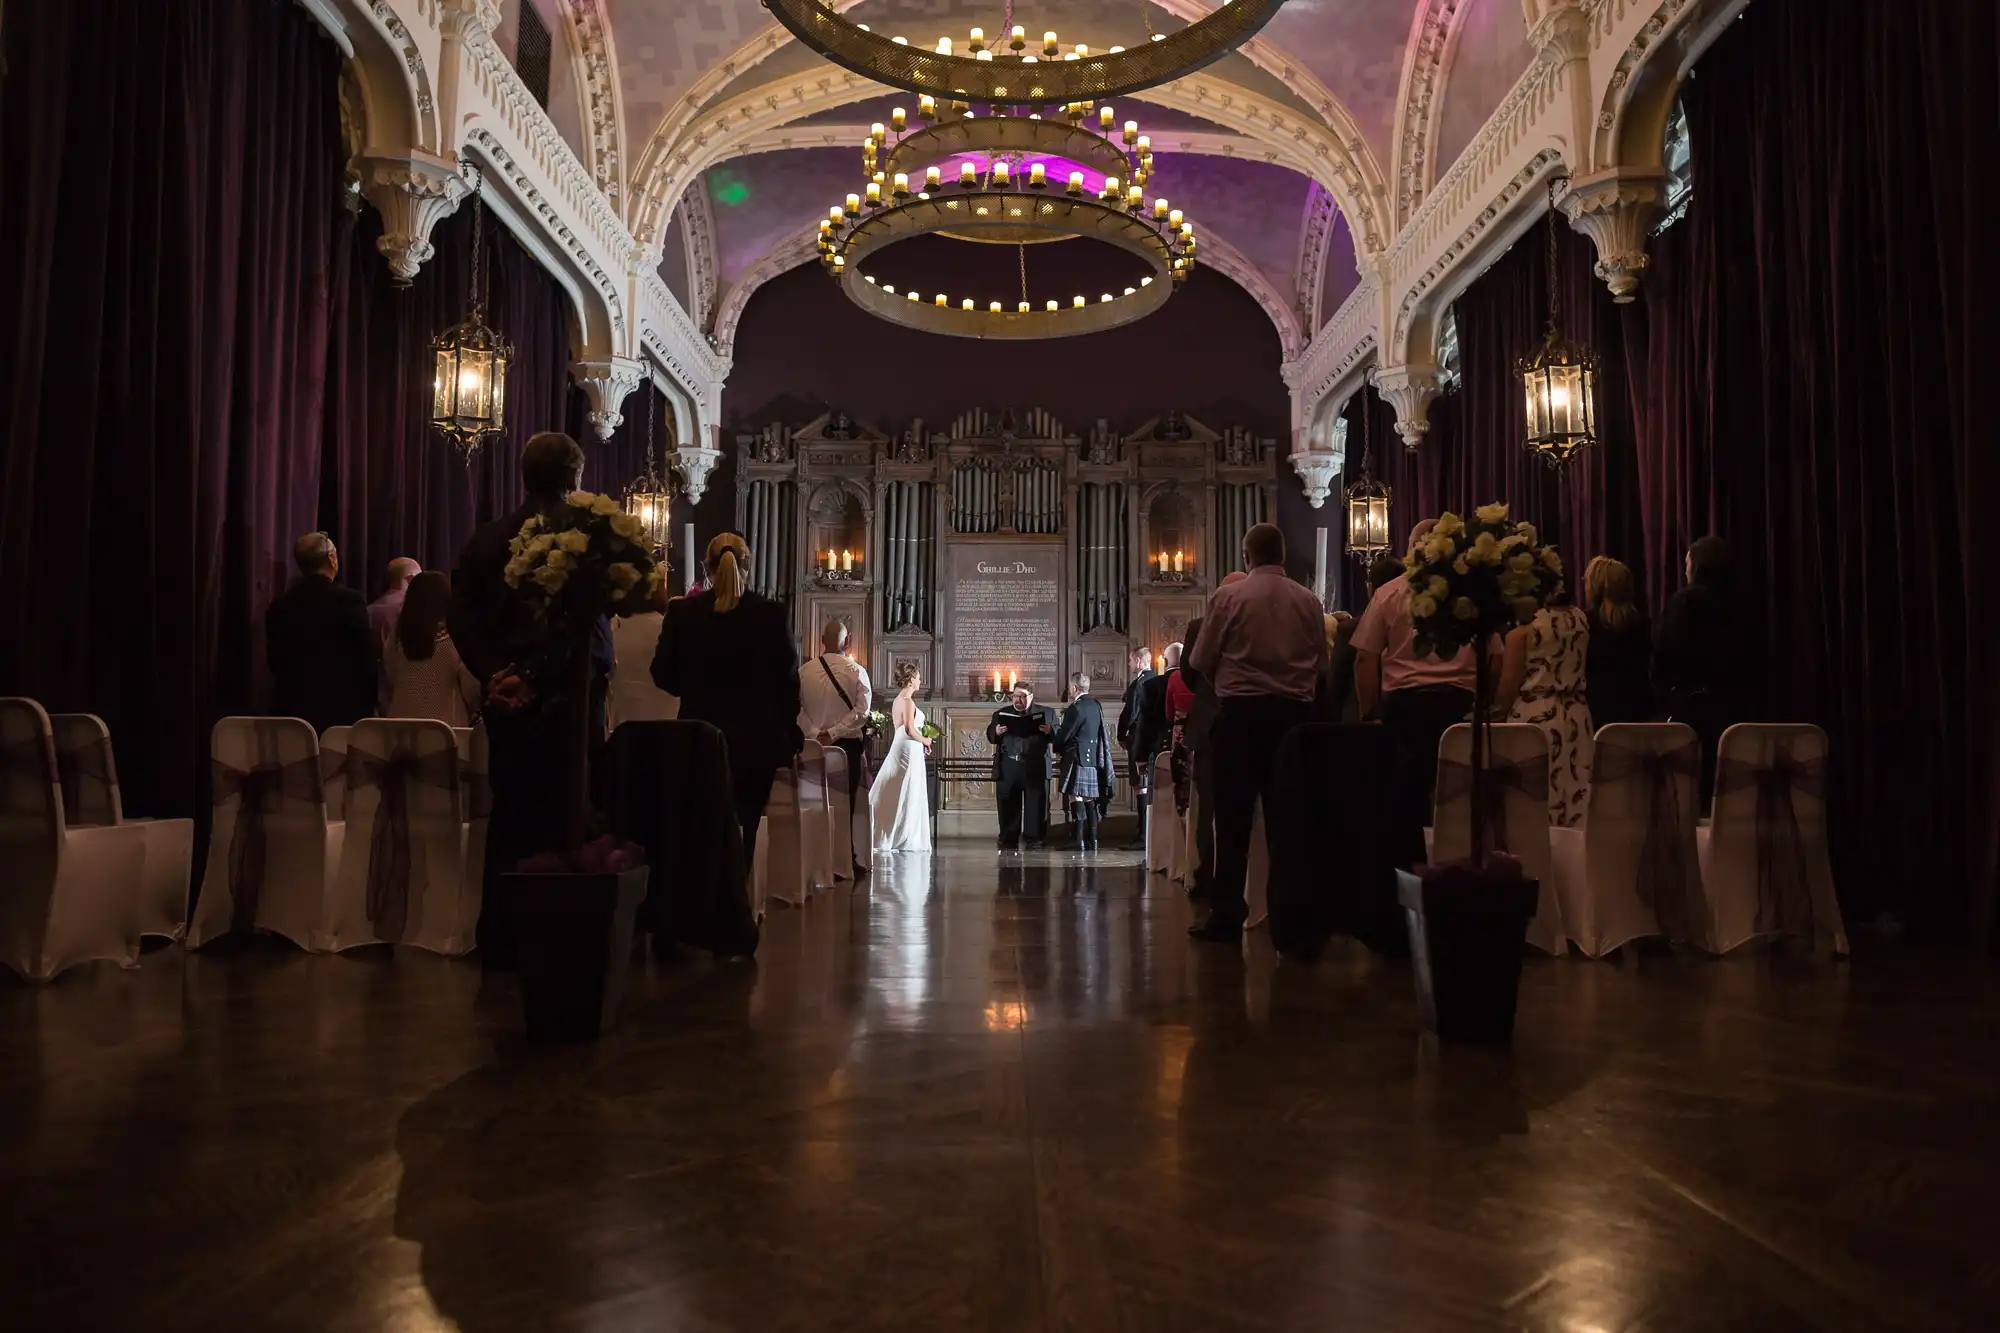 A wedding ceremony in an ornate hall, with guests standing as the couple walks down the aisle, floral decorations on either side.